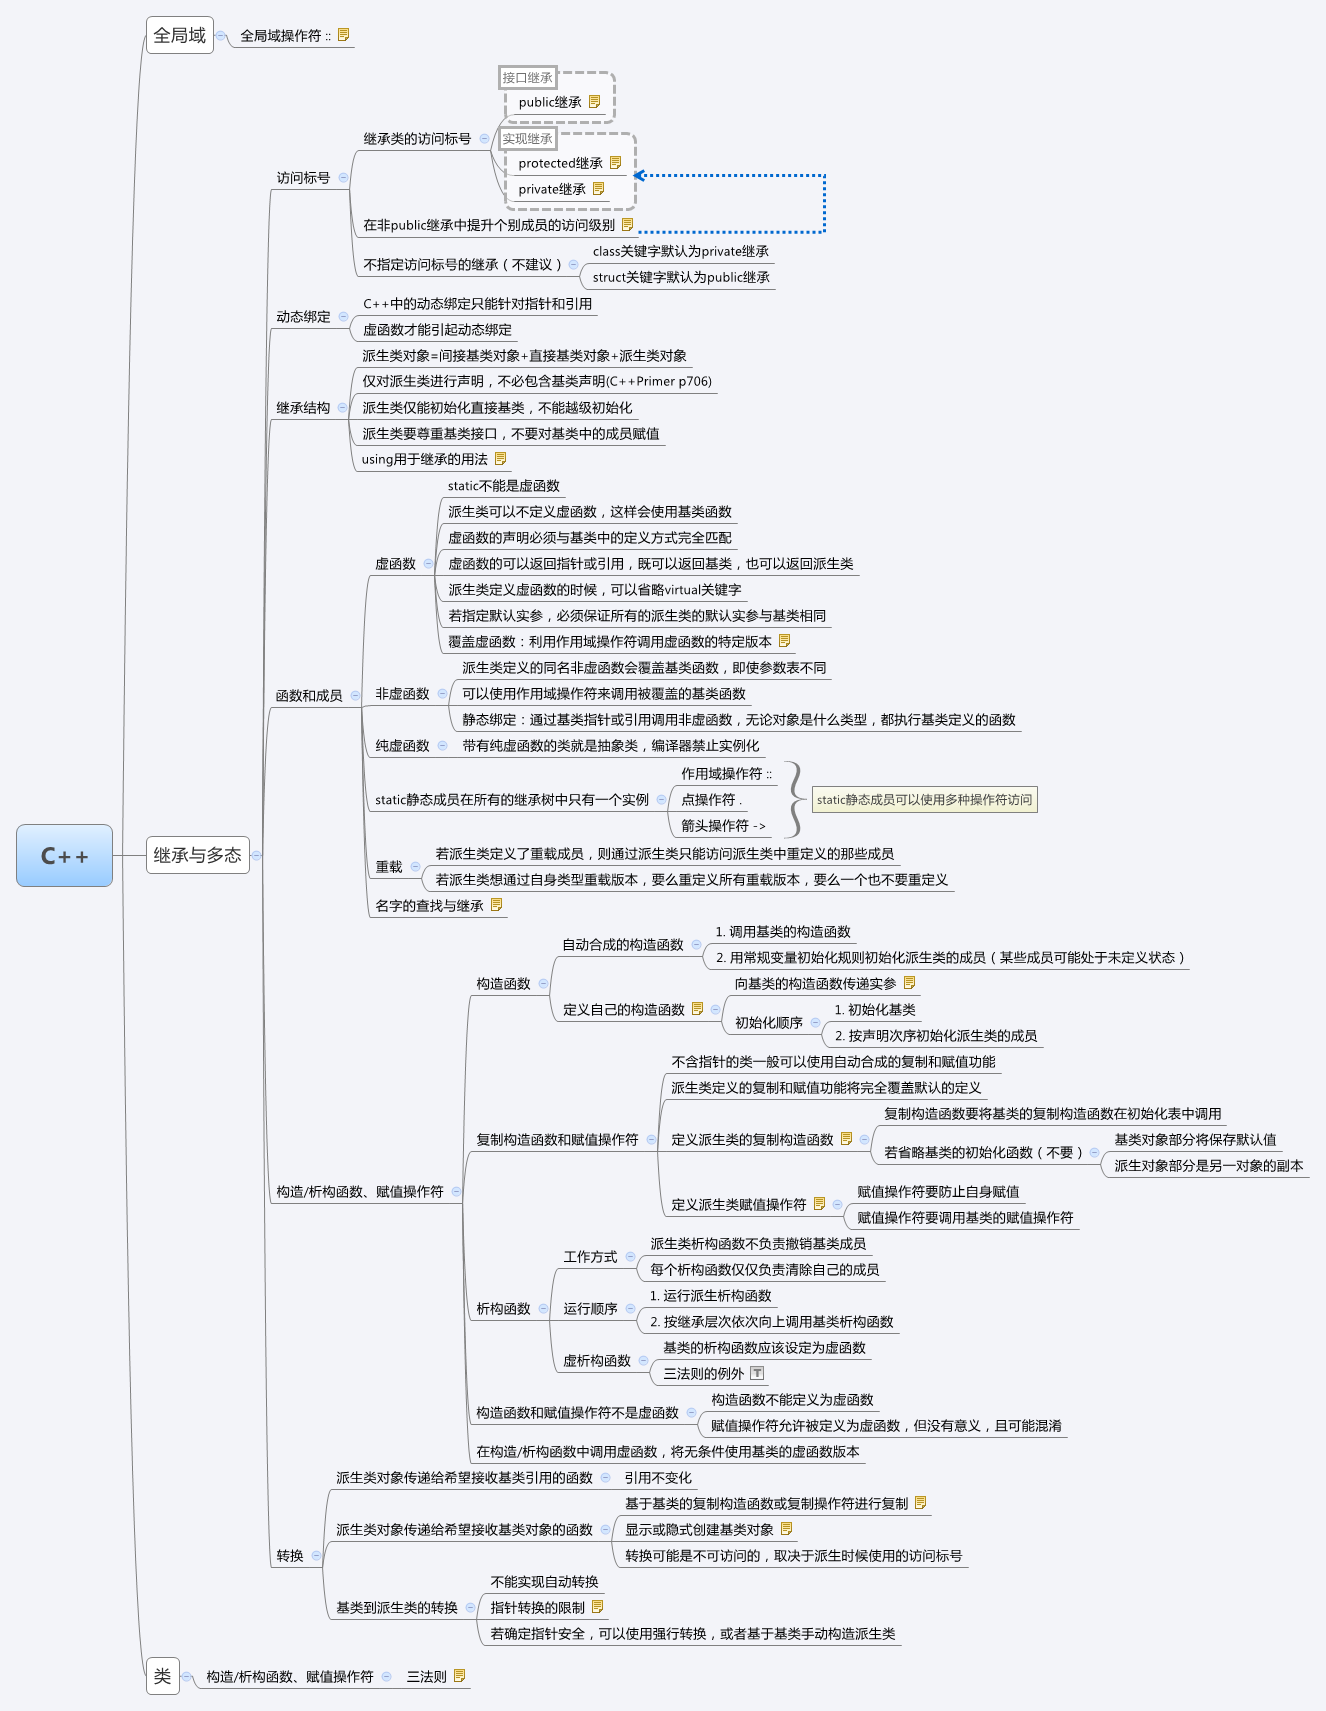 C++ mind mapping